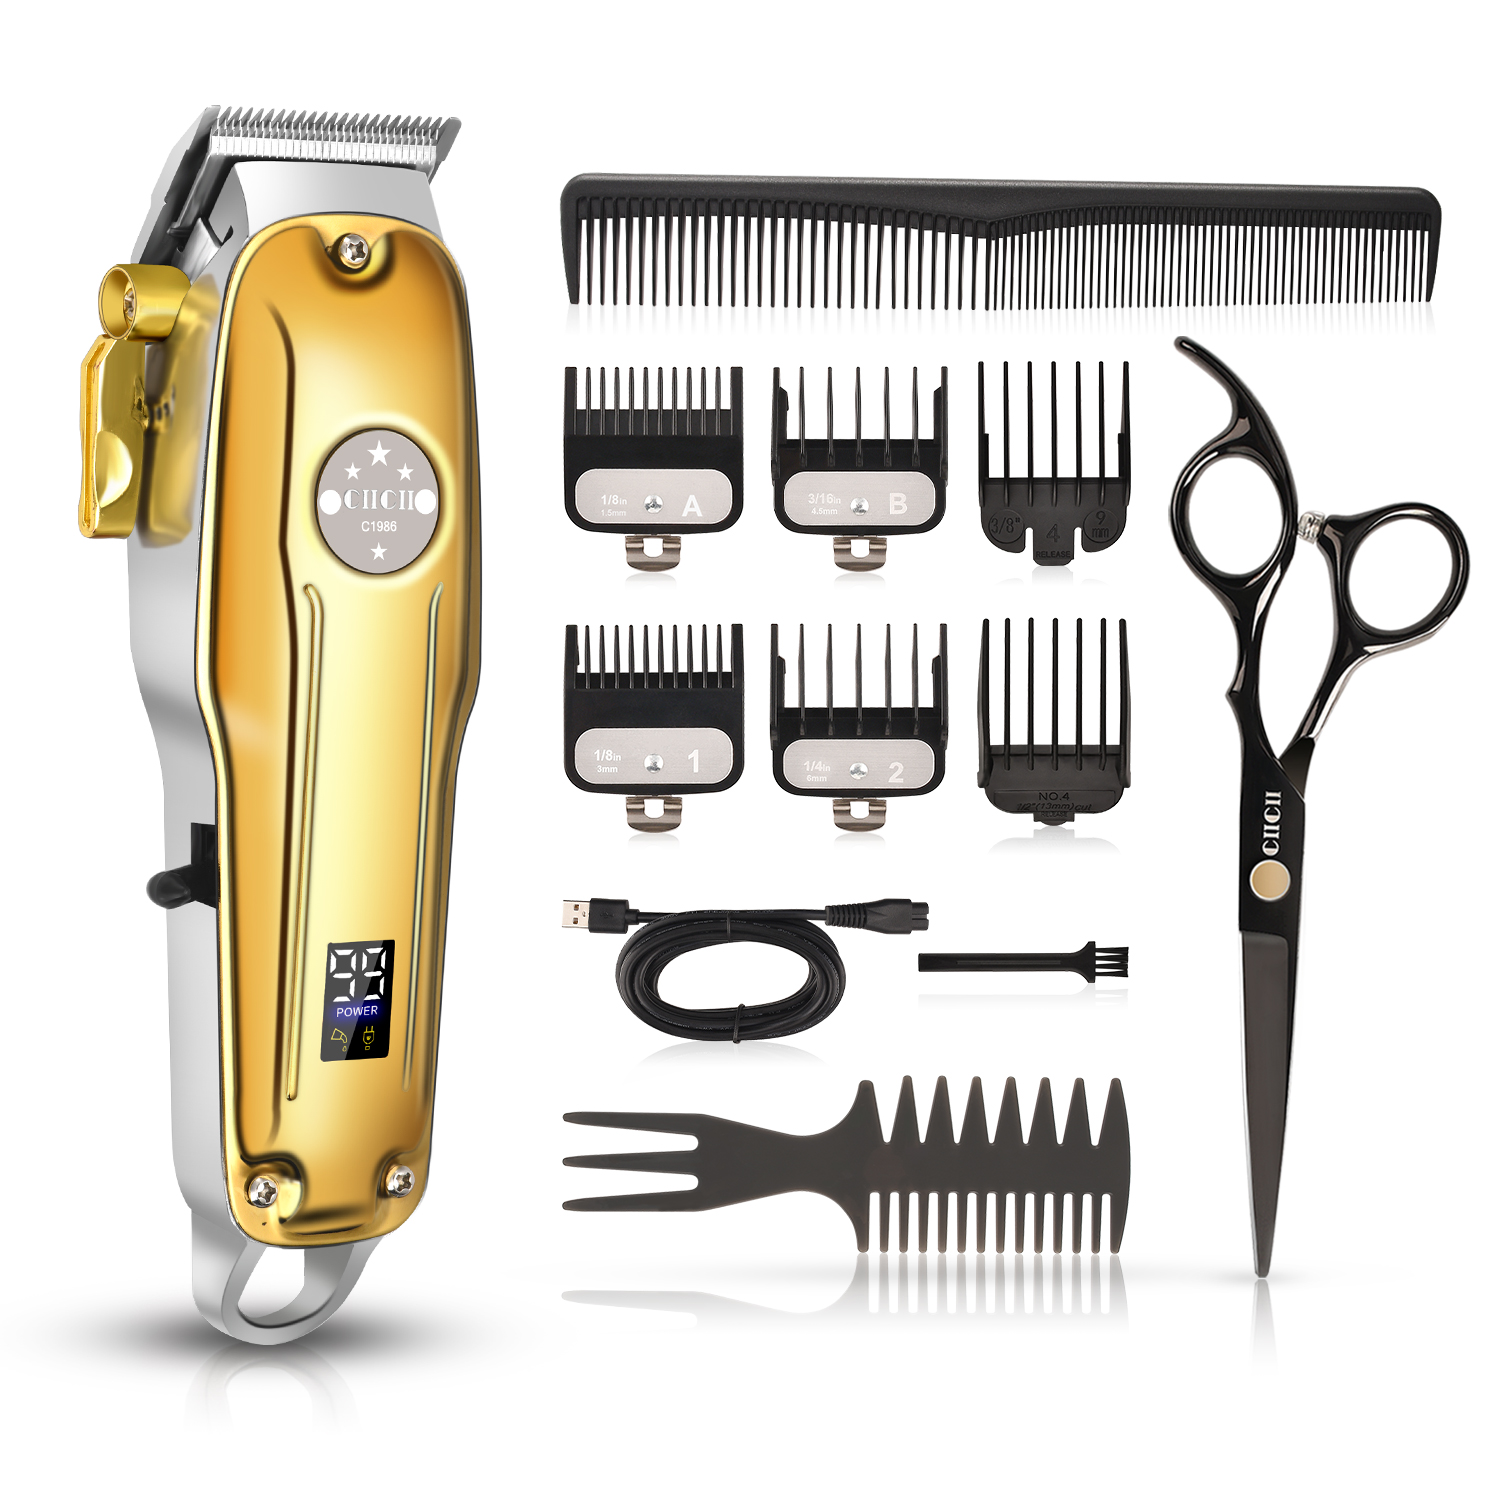 Cordless Hair Clippers, CIICII Professional Hair Clippers Trimmer Set  (12Pcs Hair Beard Cutting Grooming Trimming Shaping Kit) for Men Women Kids  Pets Home Barber Salon manufacturers, Cordless Hair Clippers exporters,  Cordless Hair